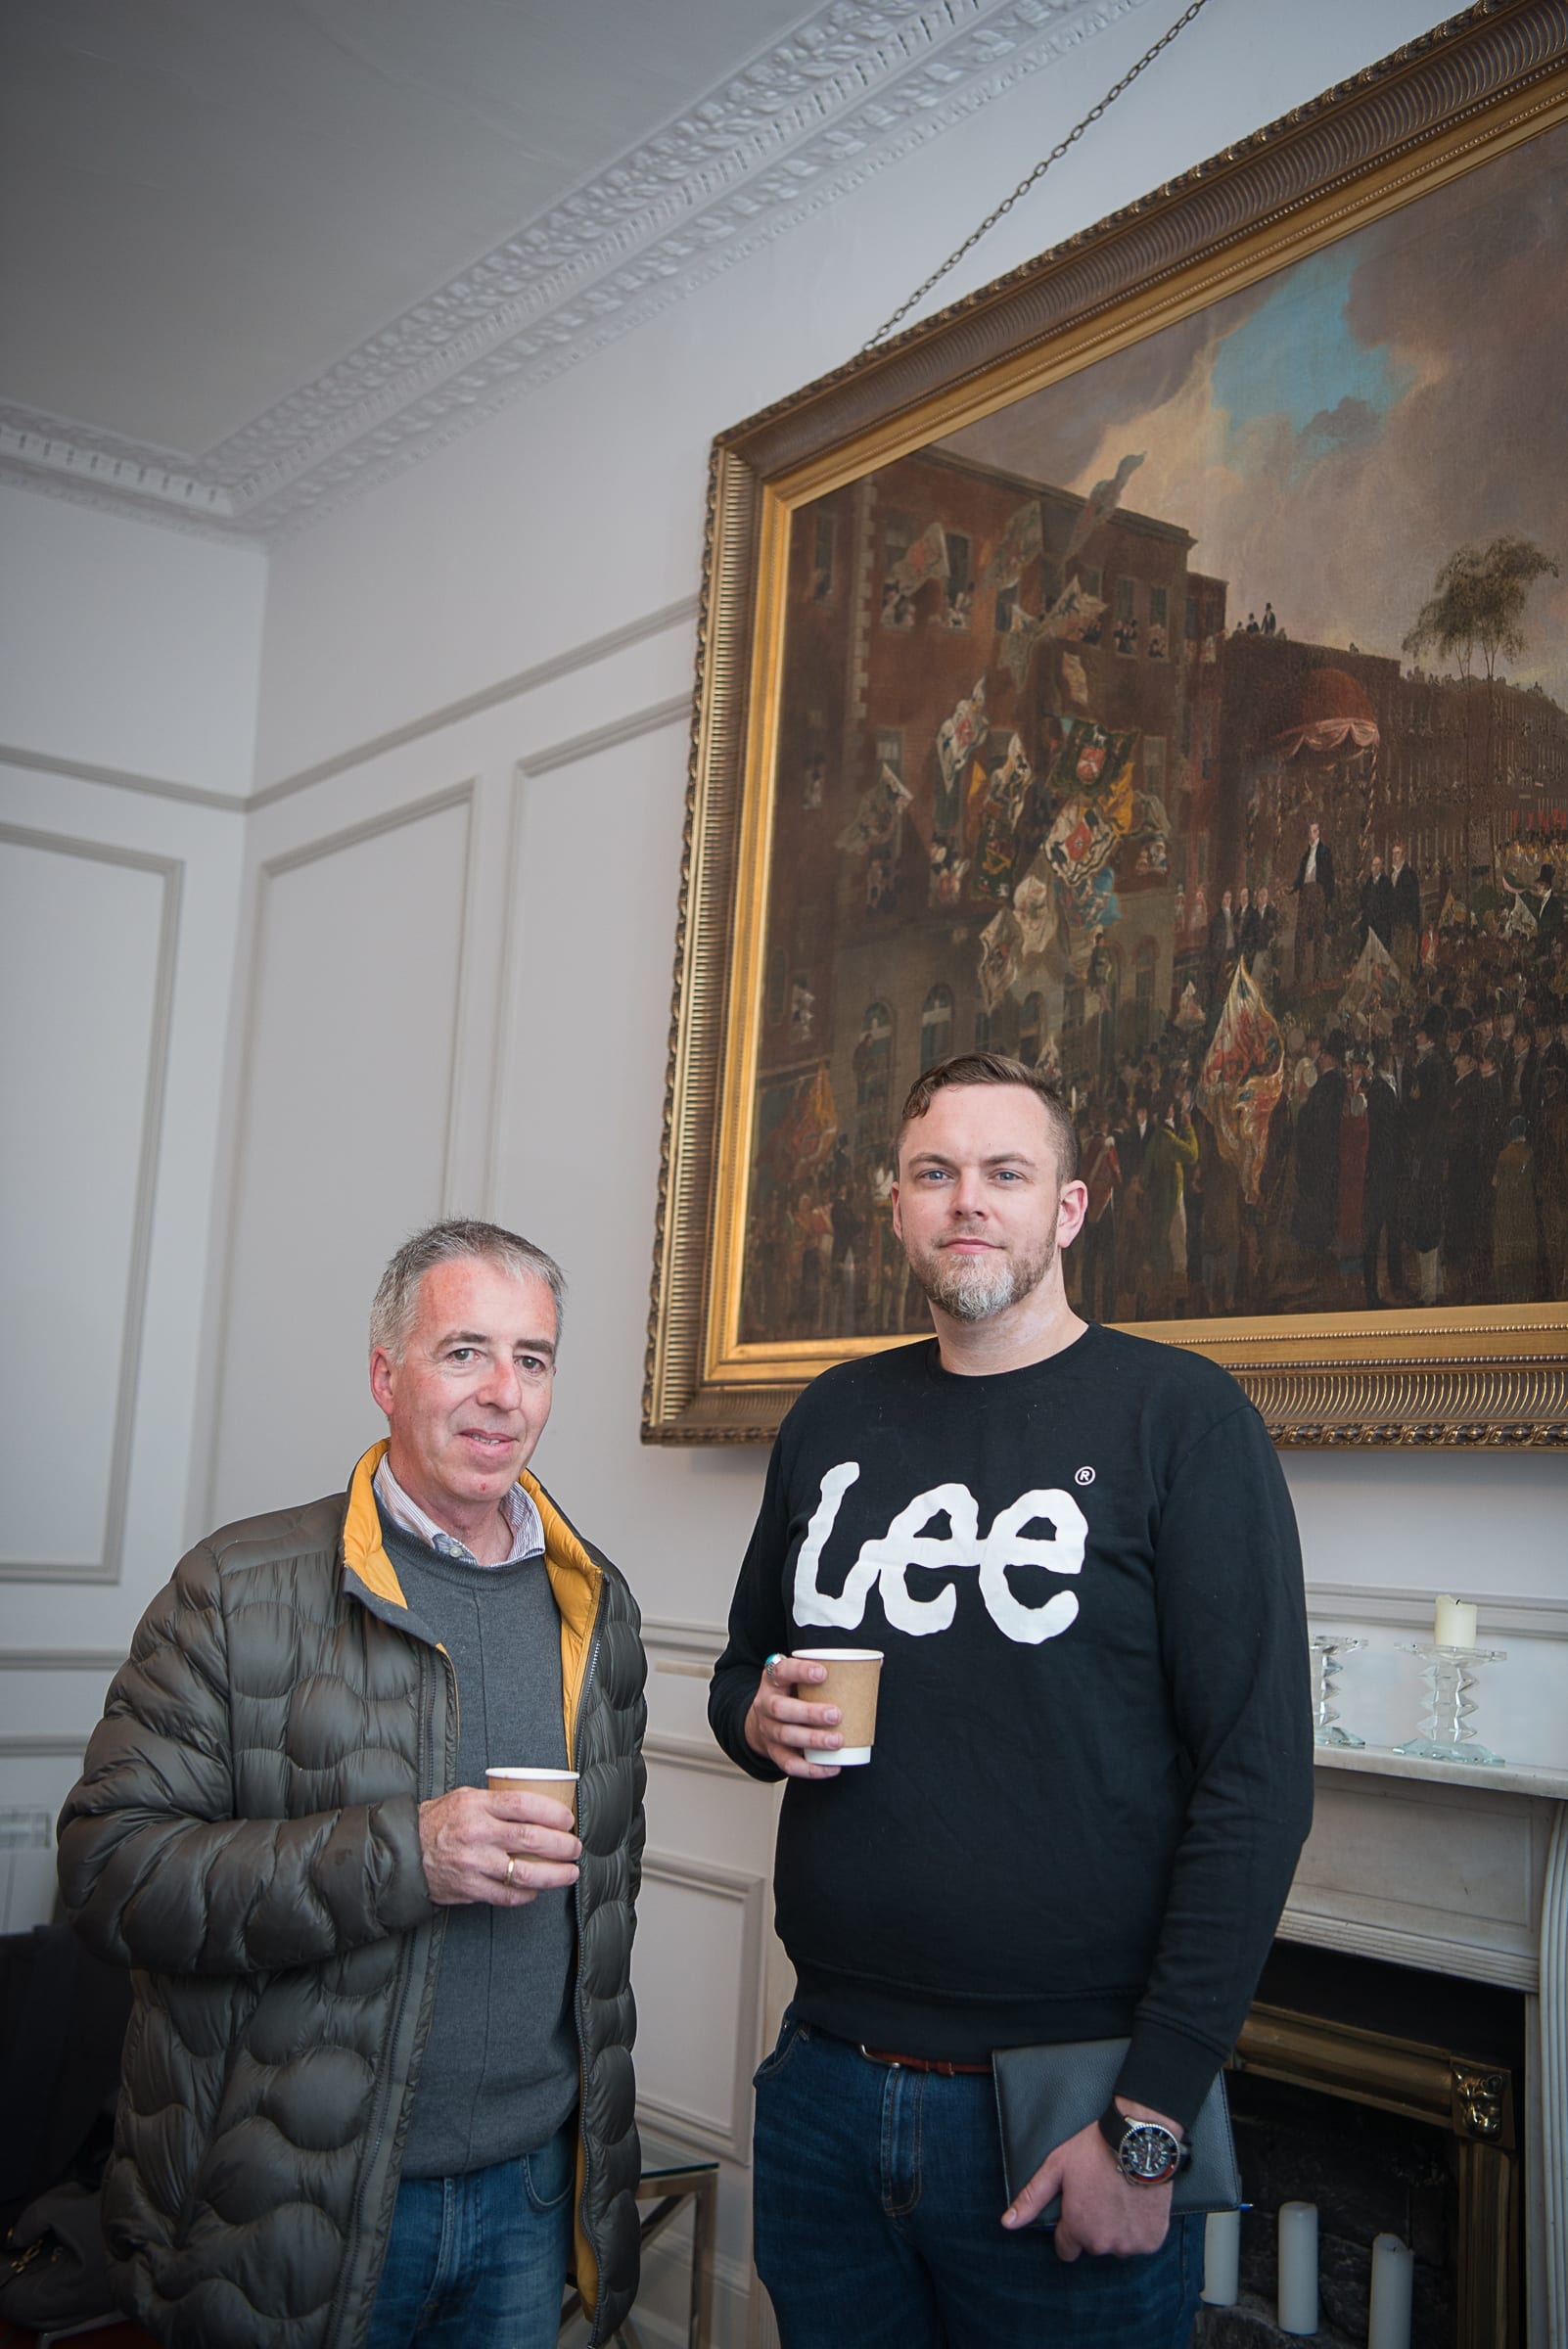 From Left to Right:  Marketing Collective Advice Clinic supported by Skillnet
which took place on the 30th May in function room of the Limerick Chamber: Seamus Flannery and Andrew O’Regan - both from Flannery’s Bar Denmark Street.  
Photo by Morning Star Photography